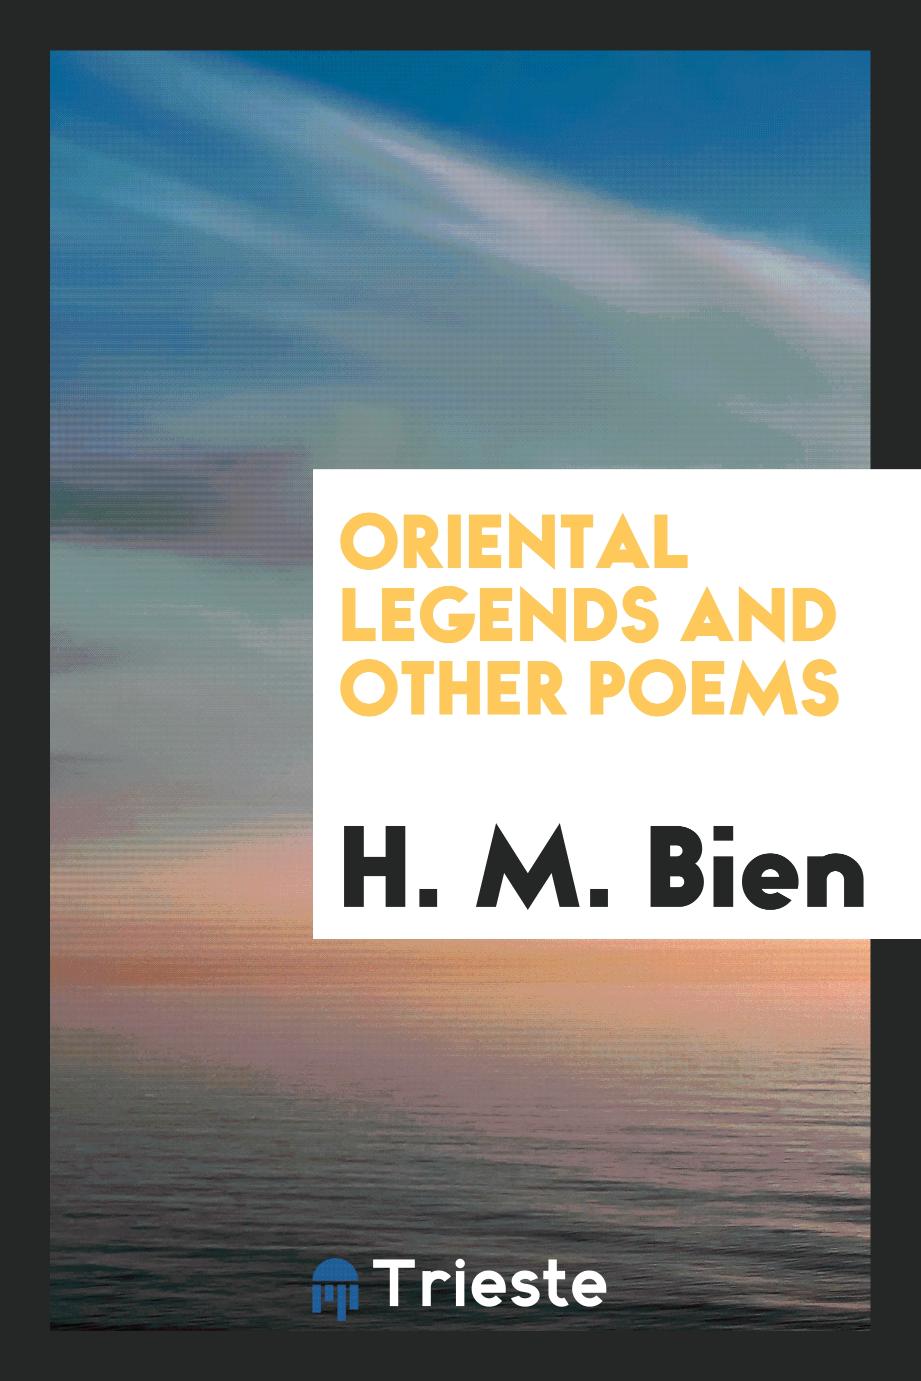 Oriental legends and other poems